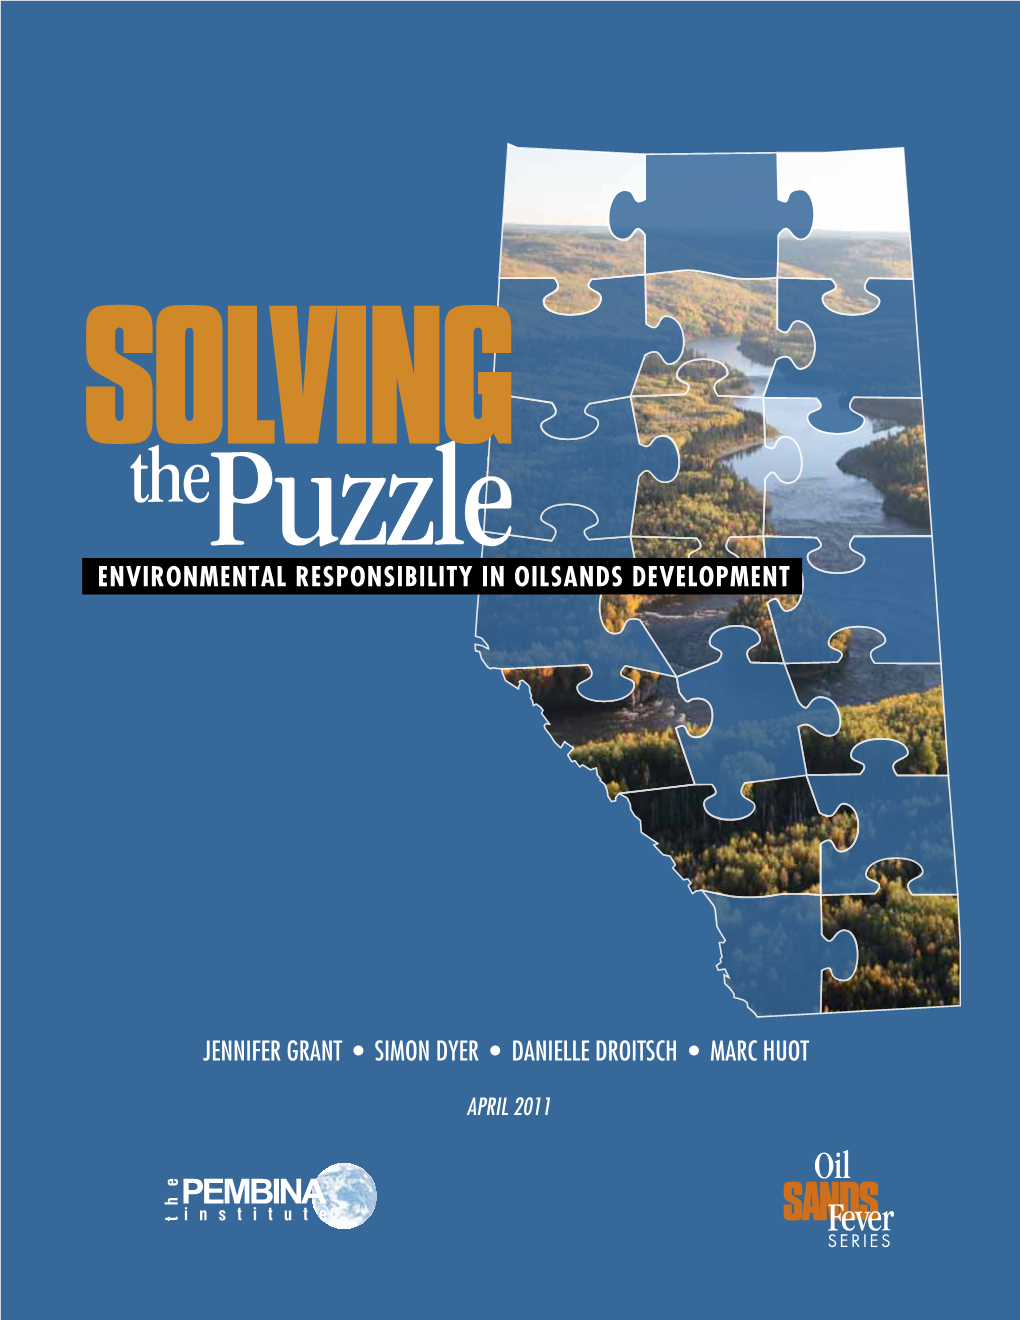 Solving the Puzzle: Environmental Responsibility in the Oilsands